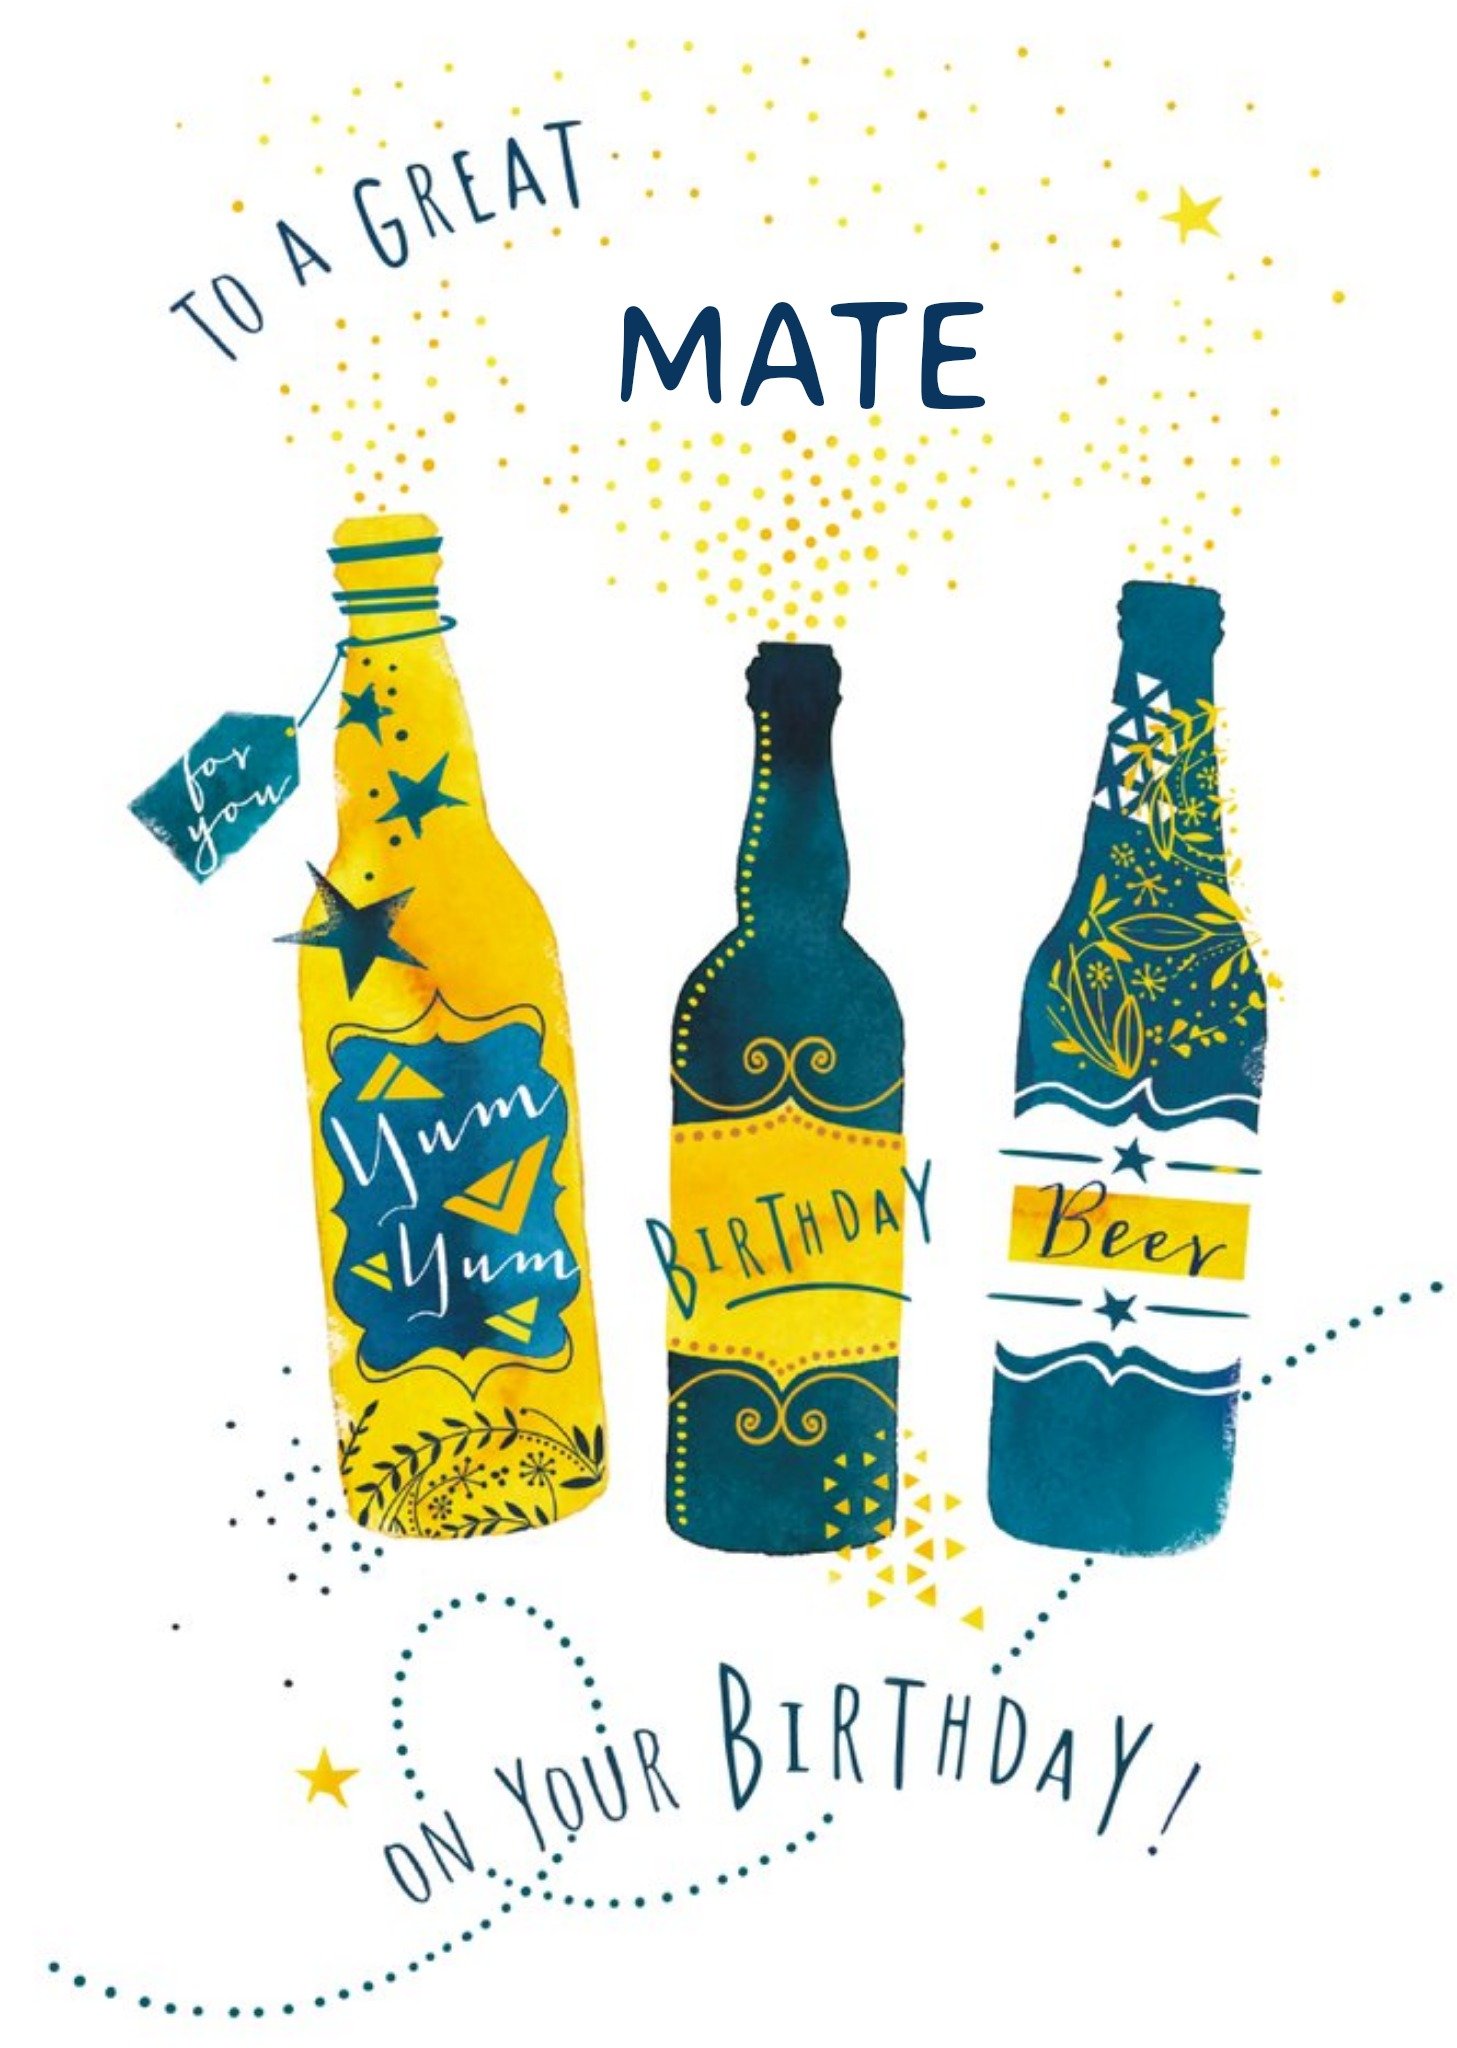 Ling Design Illustrative Beer Birthday Card To A Great Mate On Your Birthday, Large